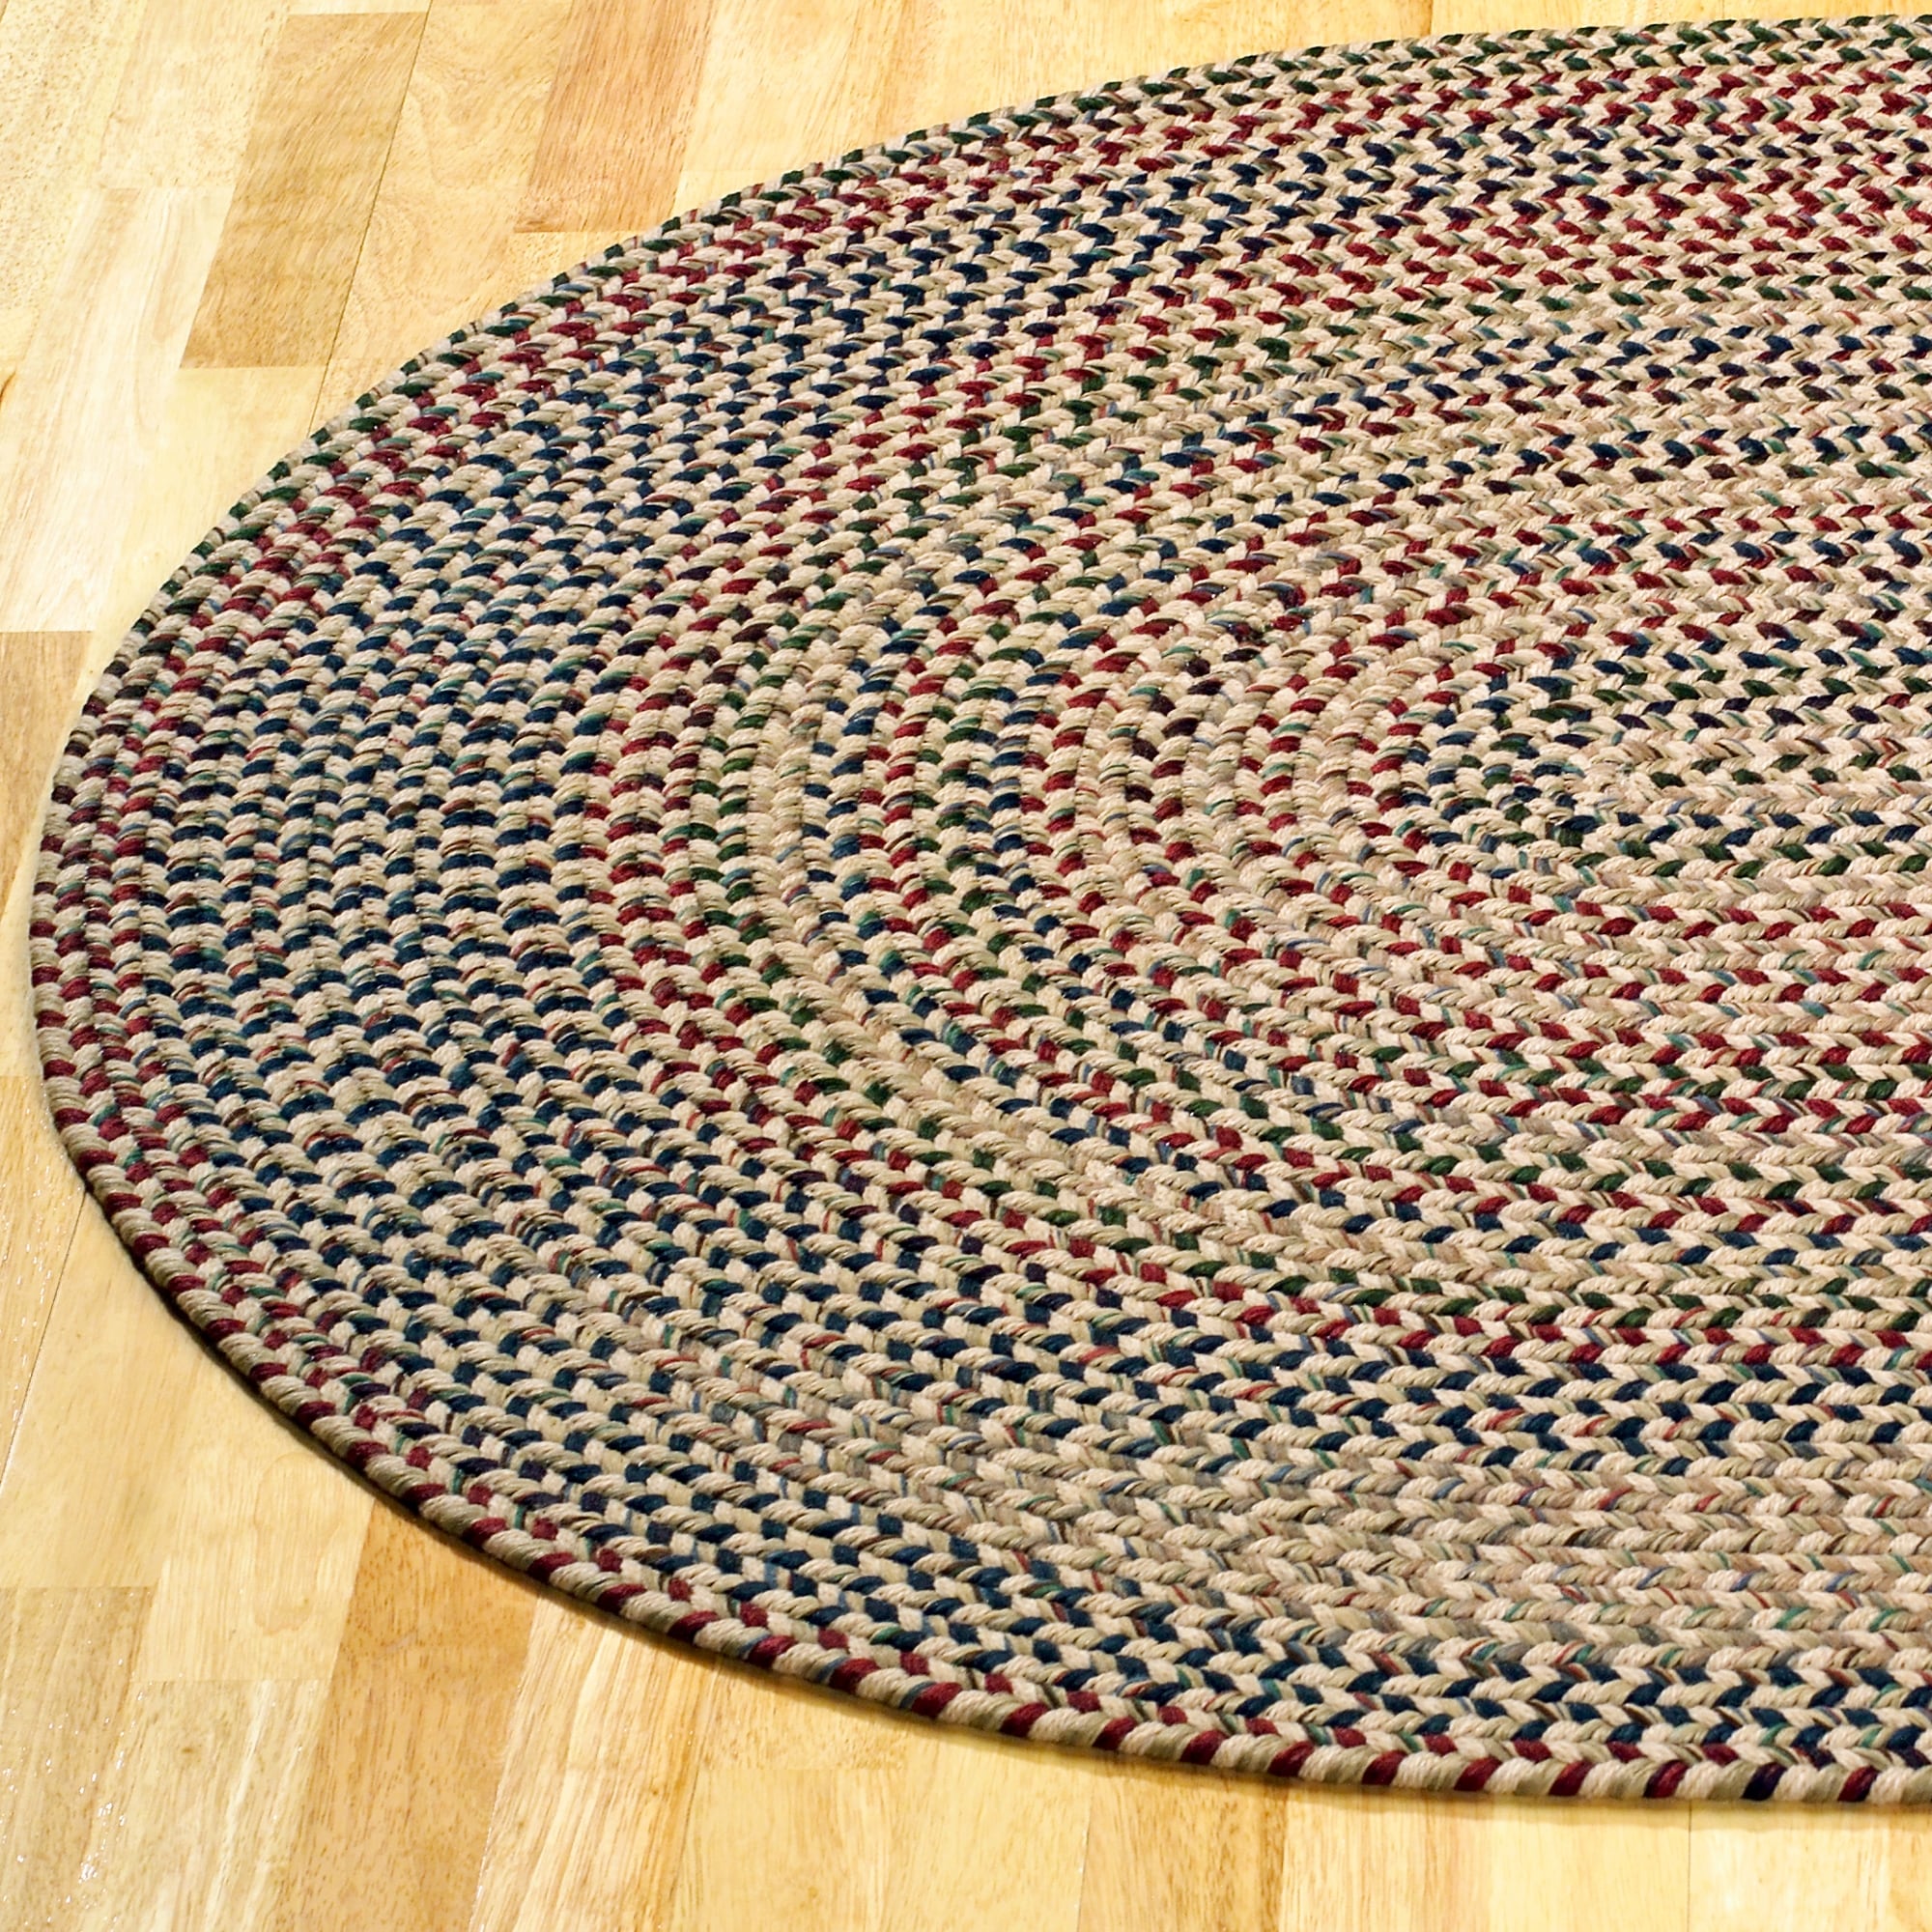 Cat Oval Braided Rug